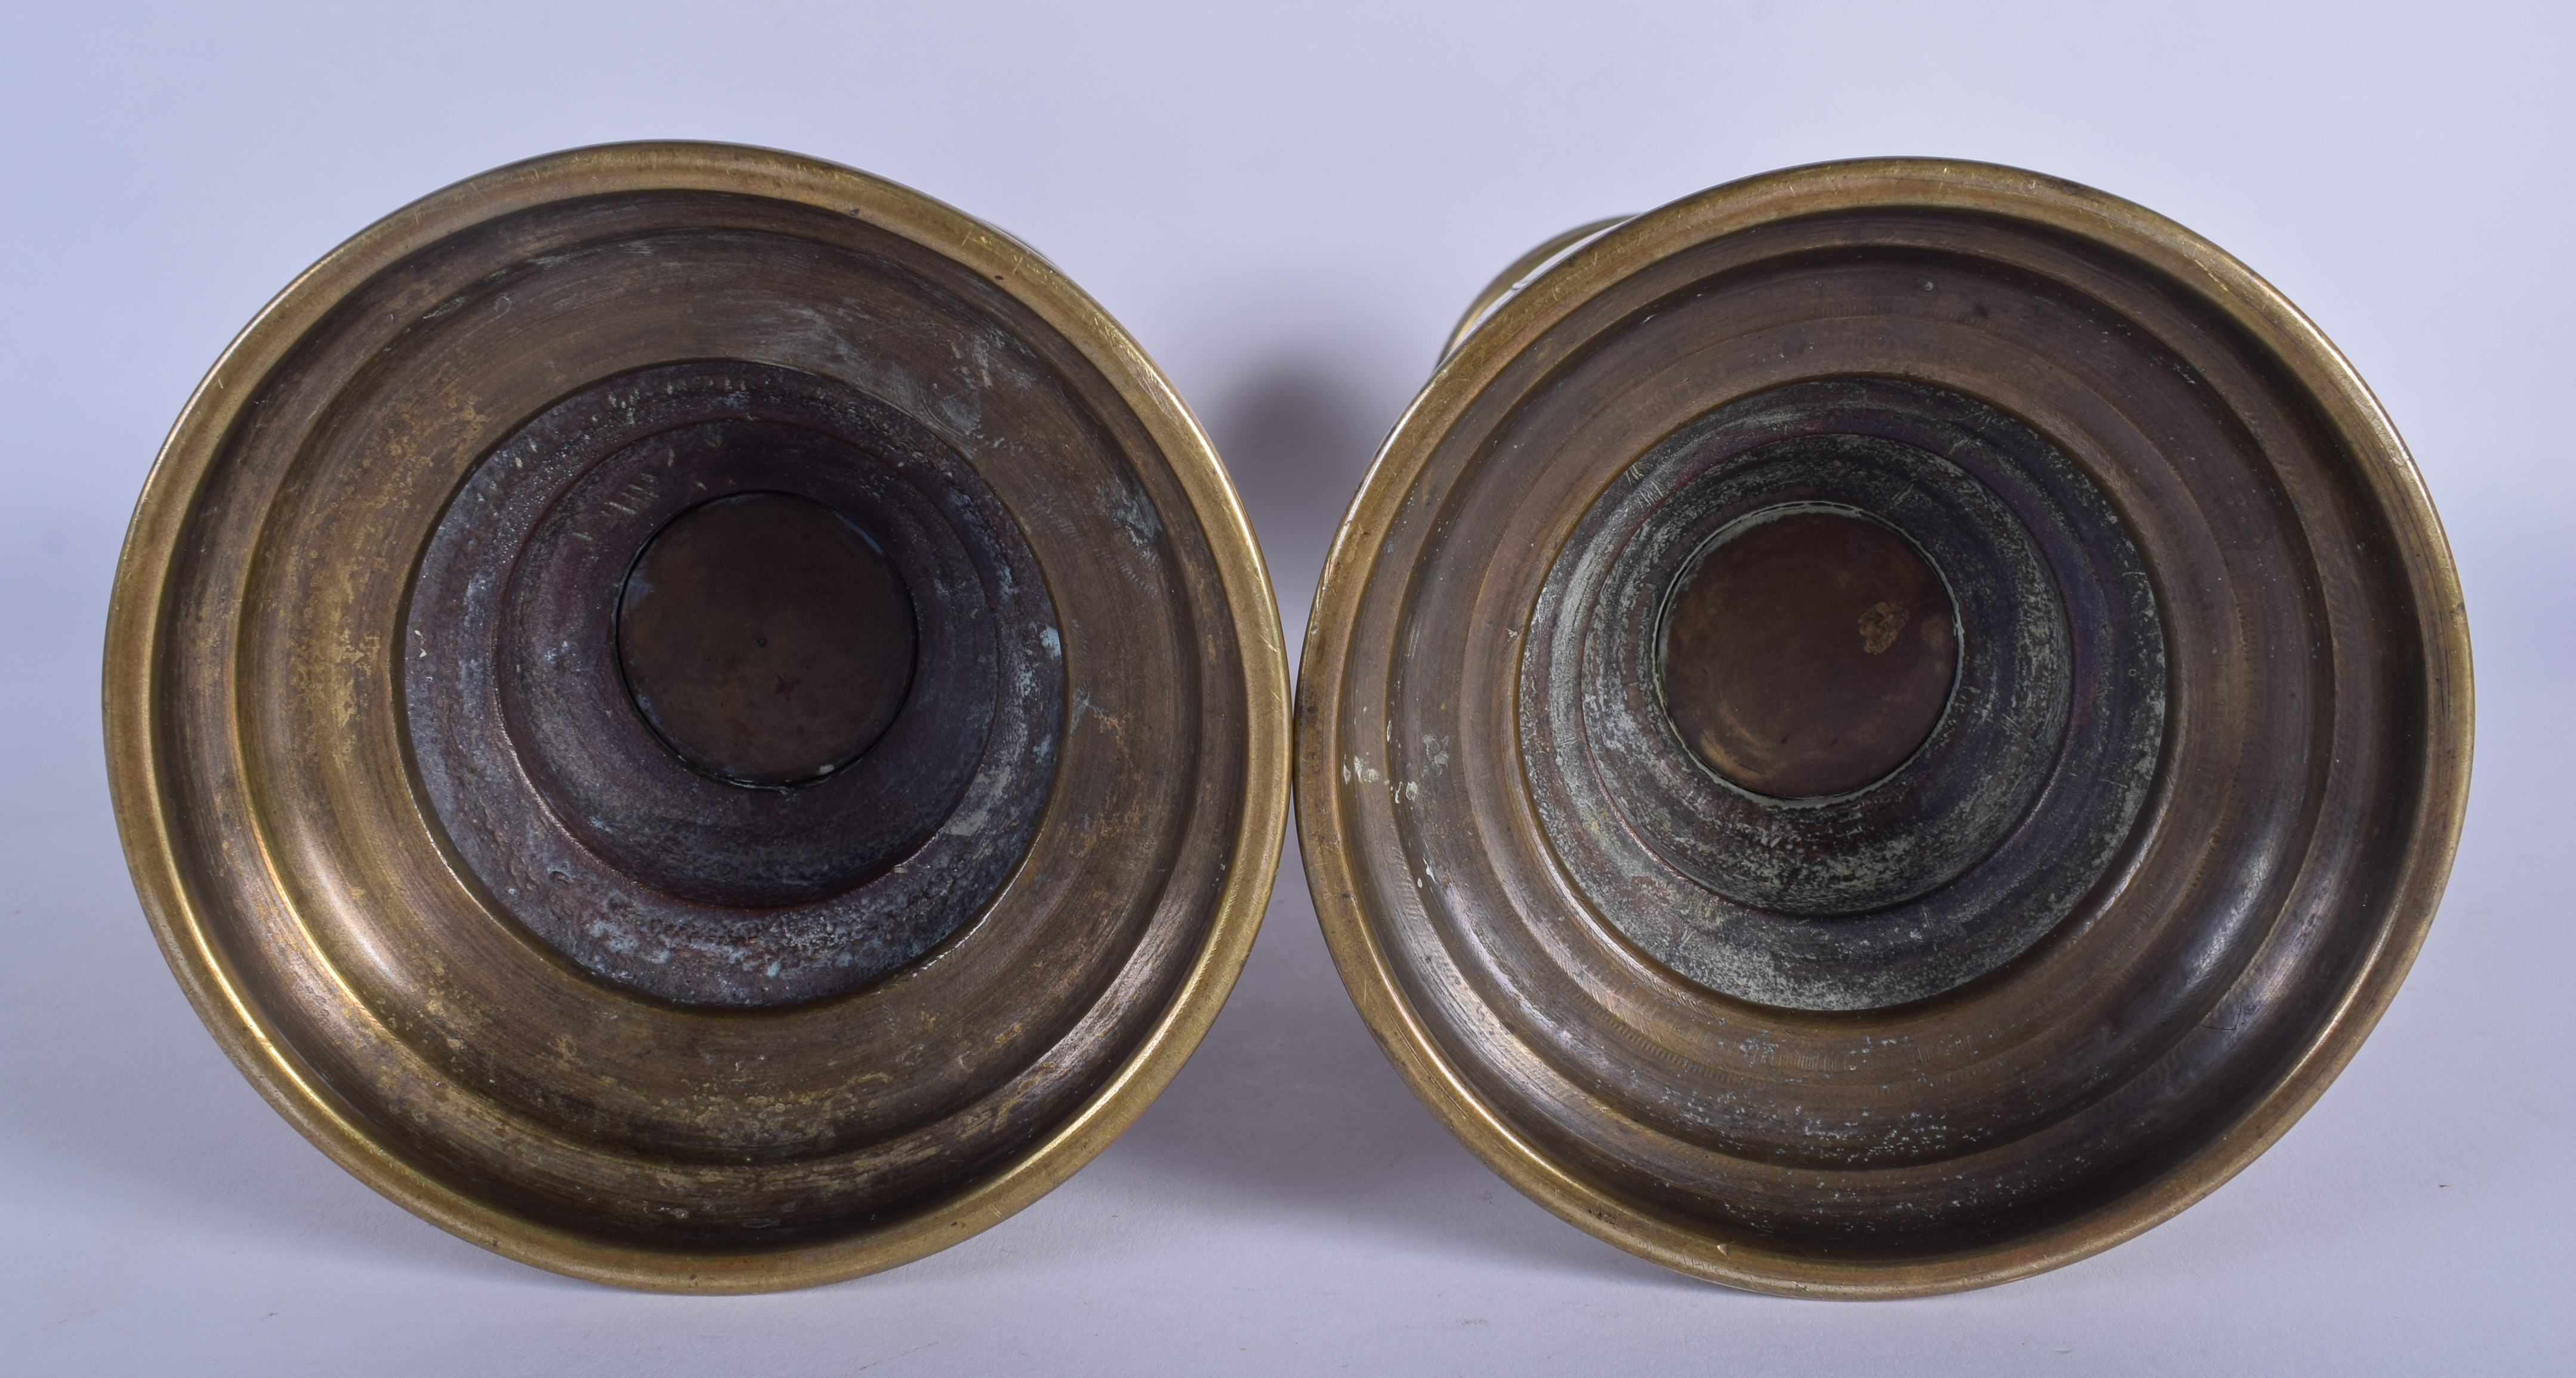 A PAIR OF 19TH CENTURY JAPANESE MEIJI PERIOD TWIN HANDLED BRONZE VASES in the manner of Kanazawa Do - Image 3 of 3